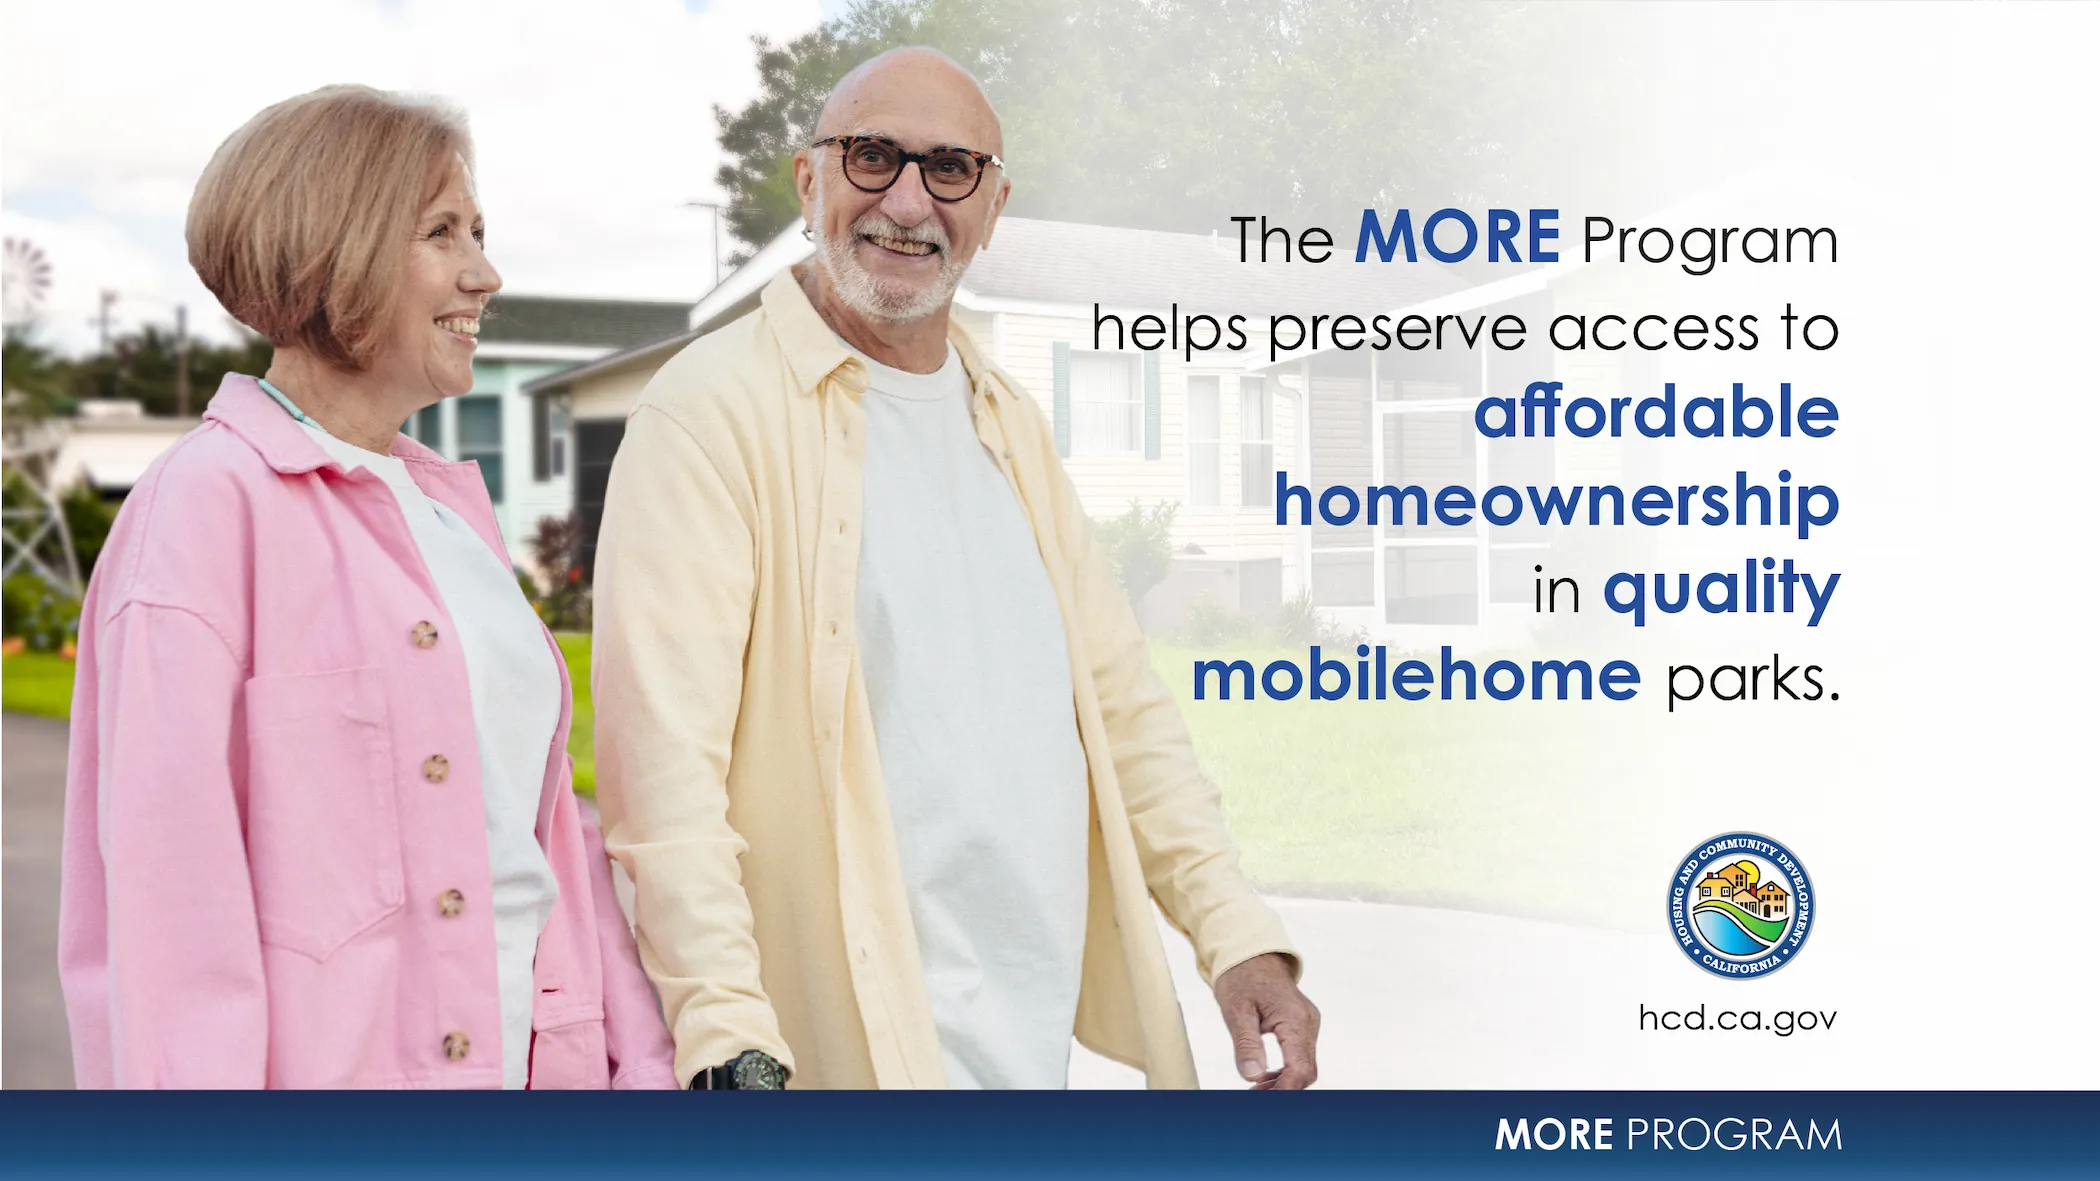 Photo of smiling couple in front of mobilehomes. Text reads: The MORE program helps preserve access to affordable homeownership in quality mobilehome parks.